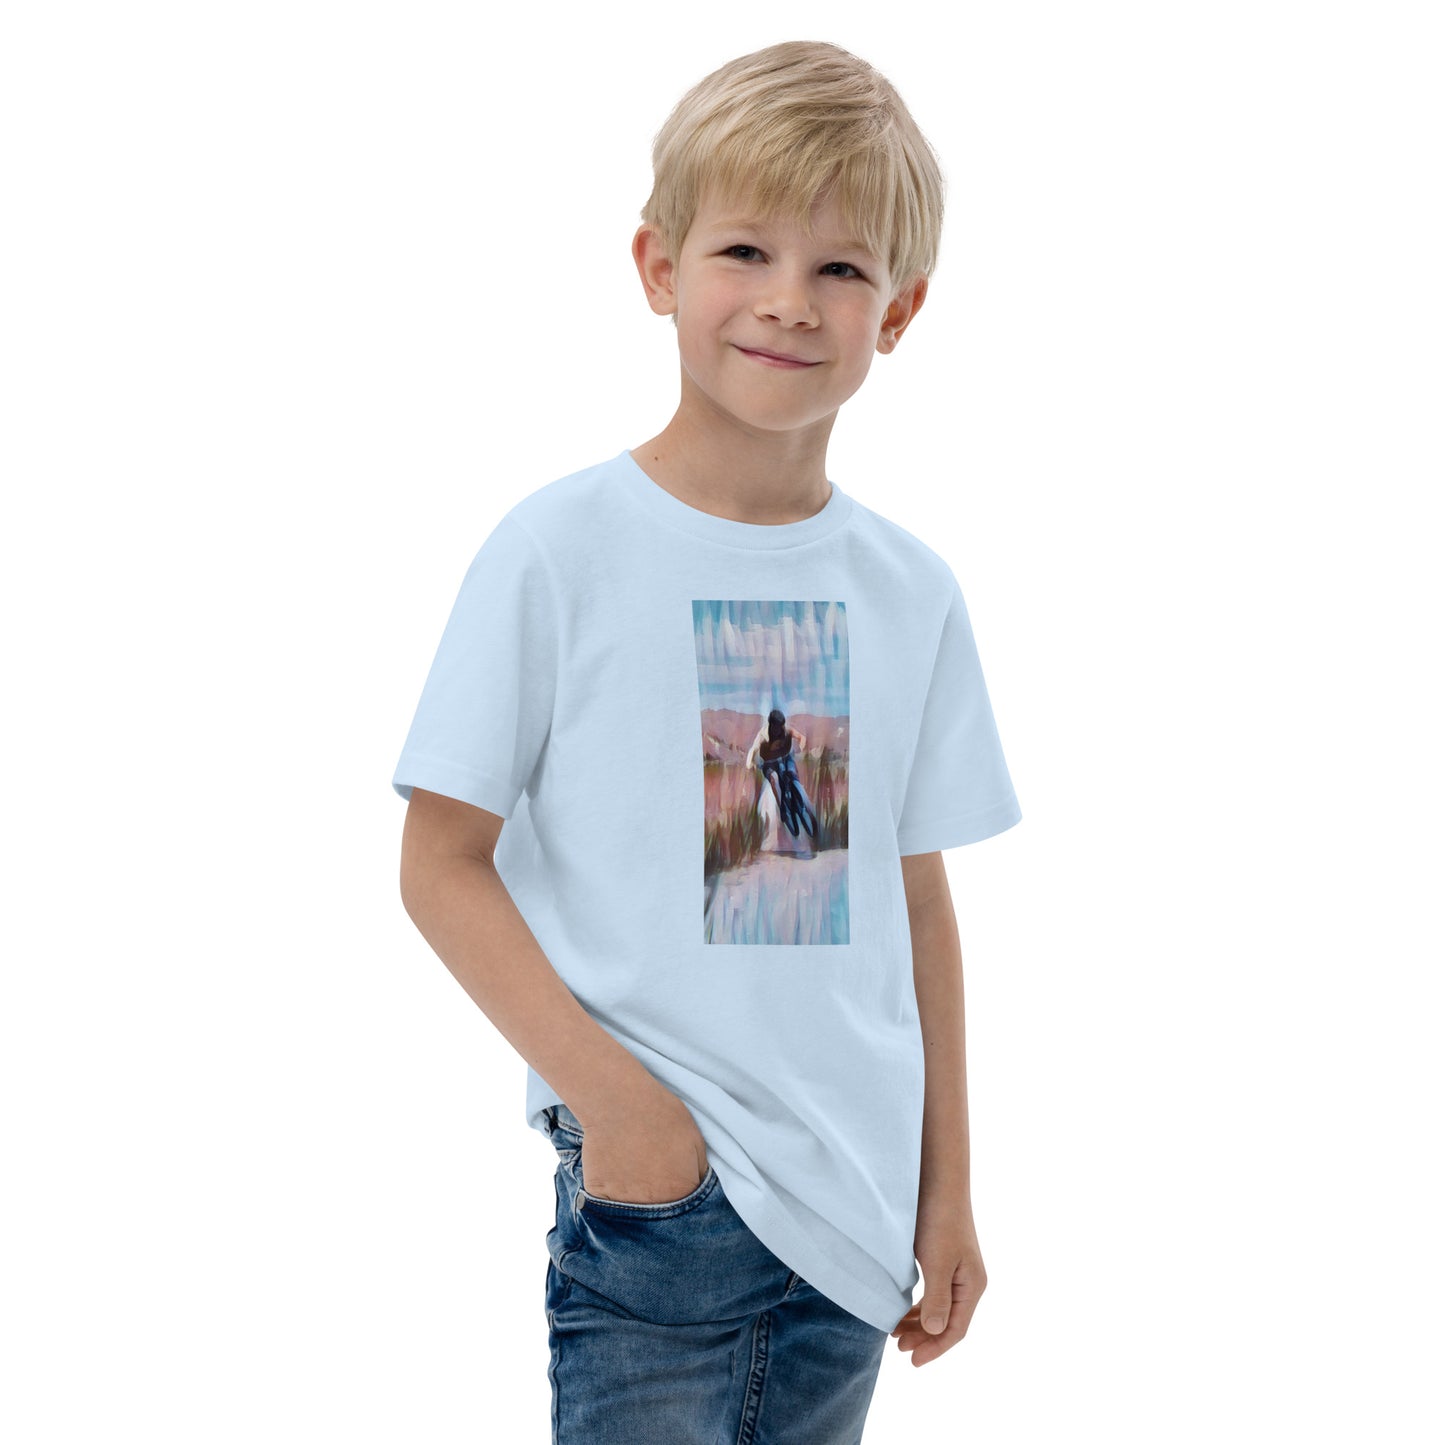 Kids are way cooler than adults/Watercolor paintings of the desert are cool (t-shirt)